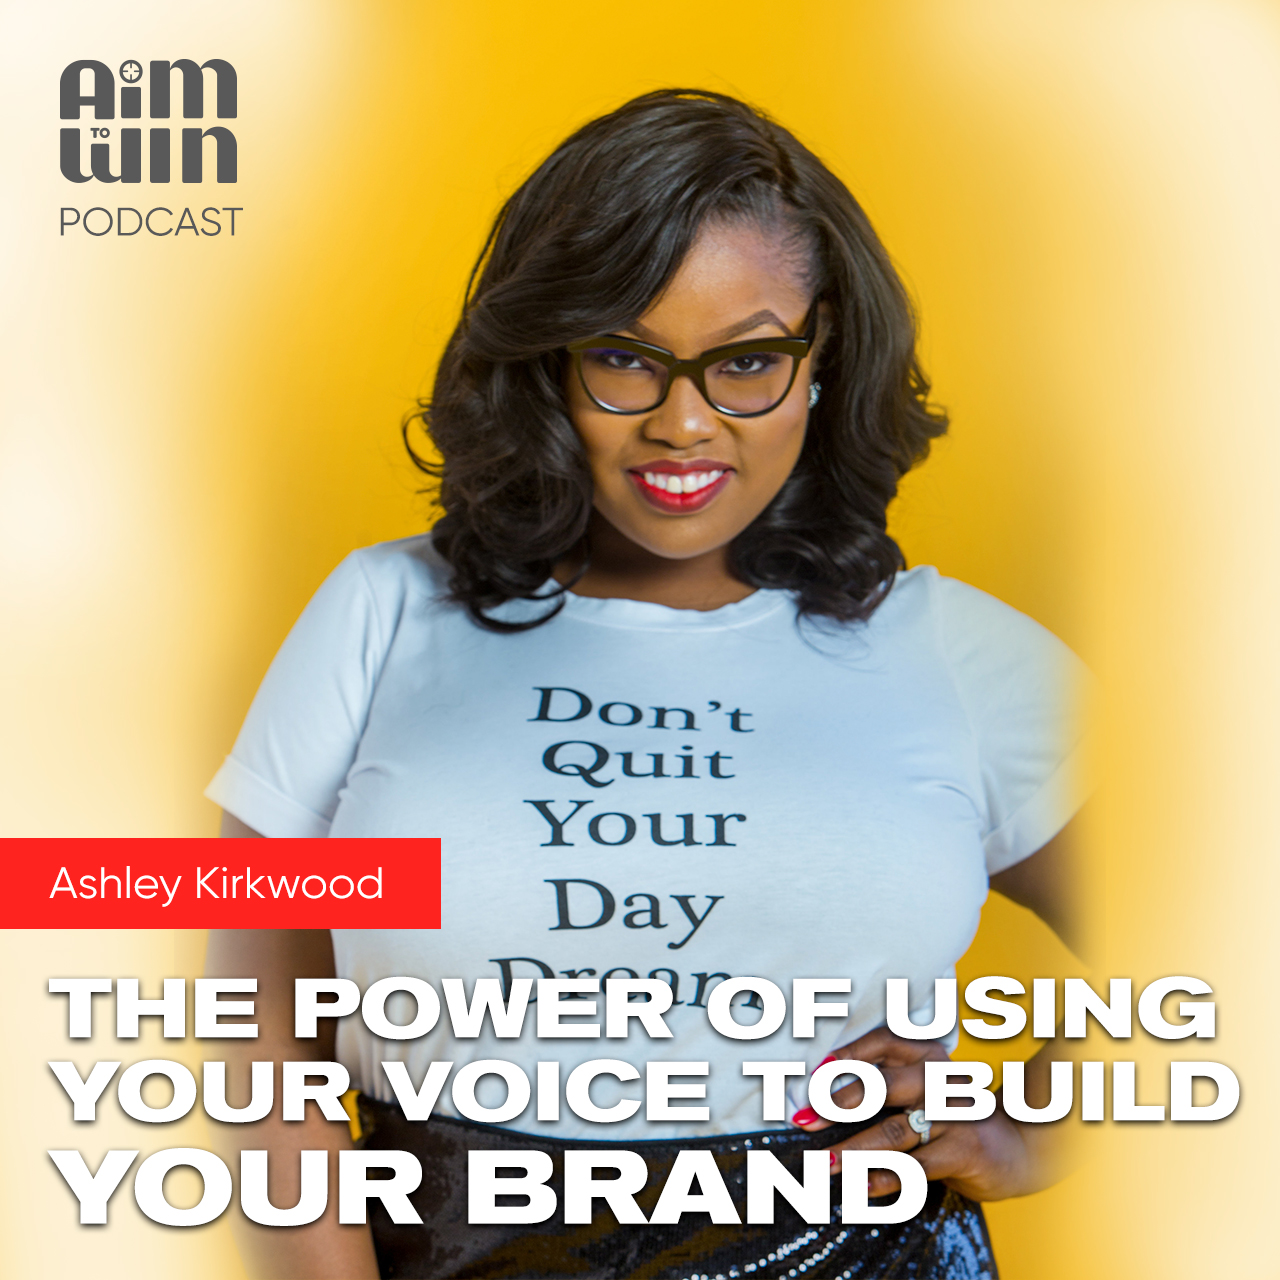 Using your voice to build your brand